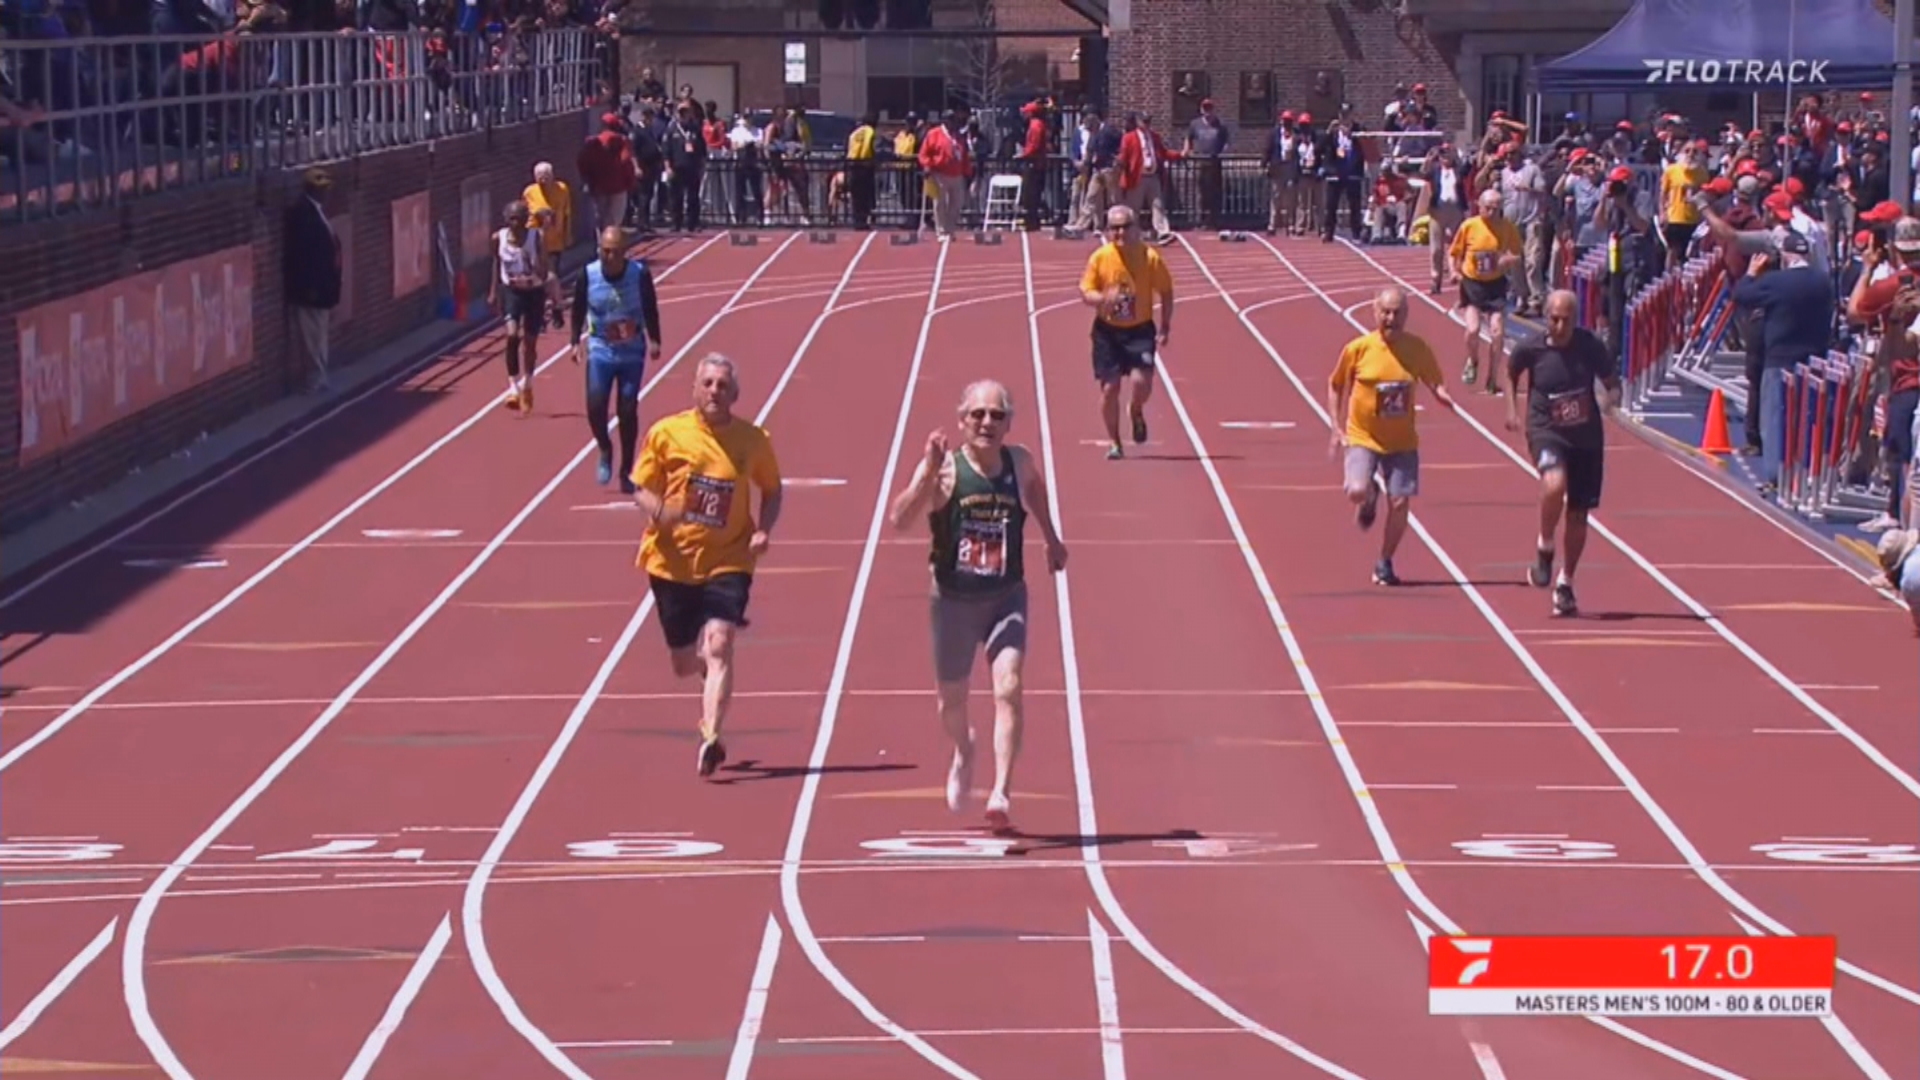 85-Year-Old La Salle Professor Josh Buch Finishes In 4th Place At 100-Meter Dash For Runners 80-Or-Older At Penn Relays